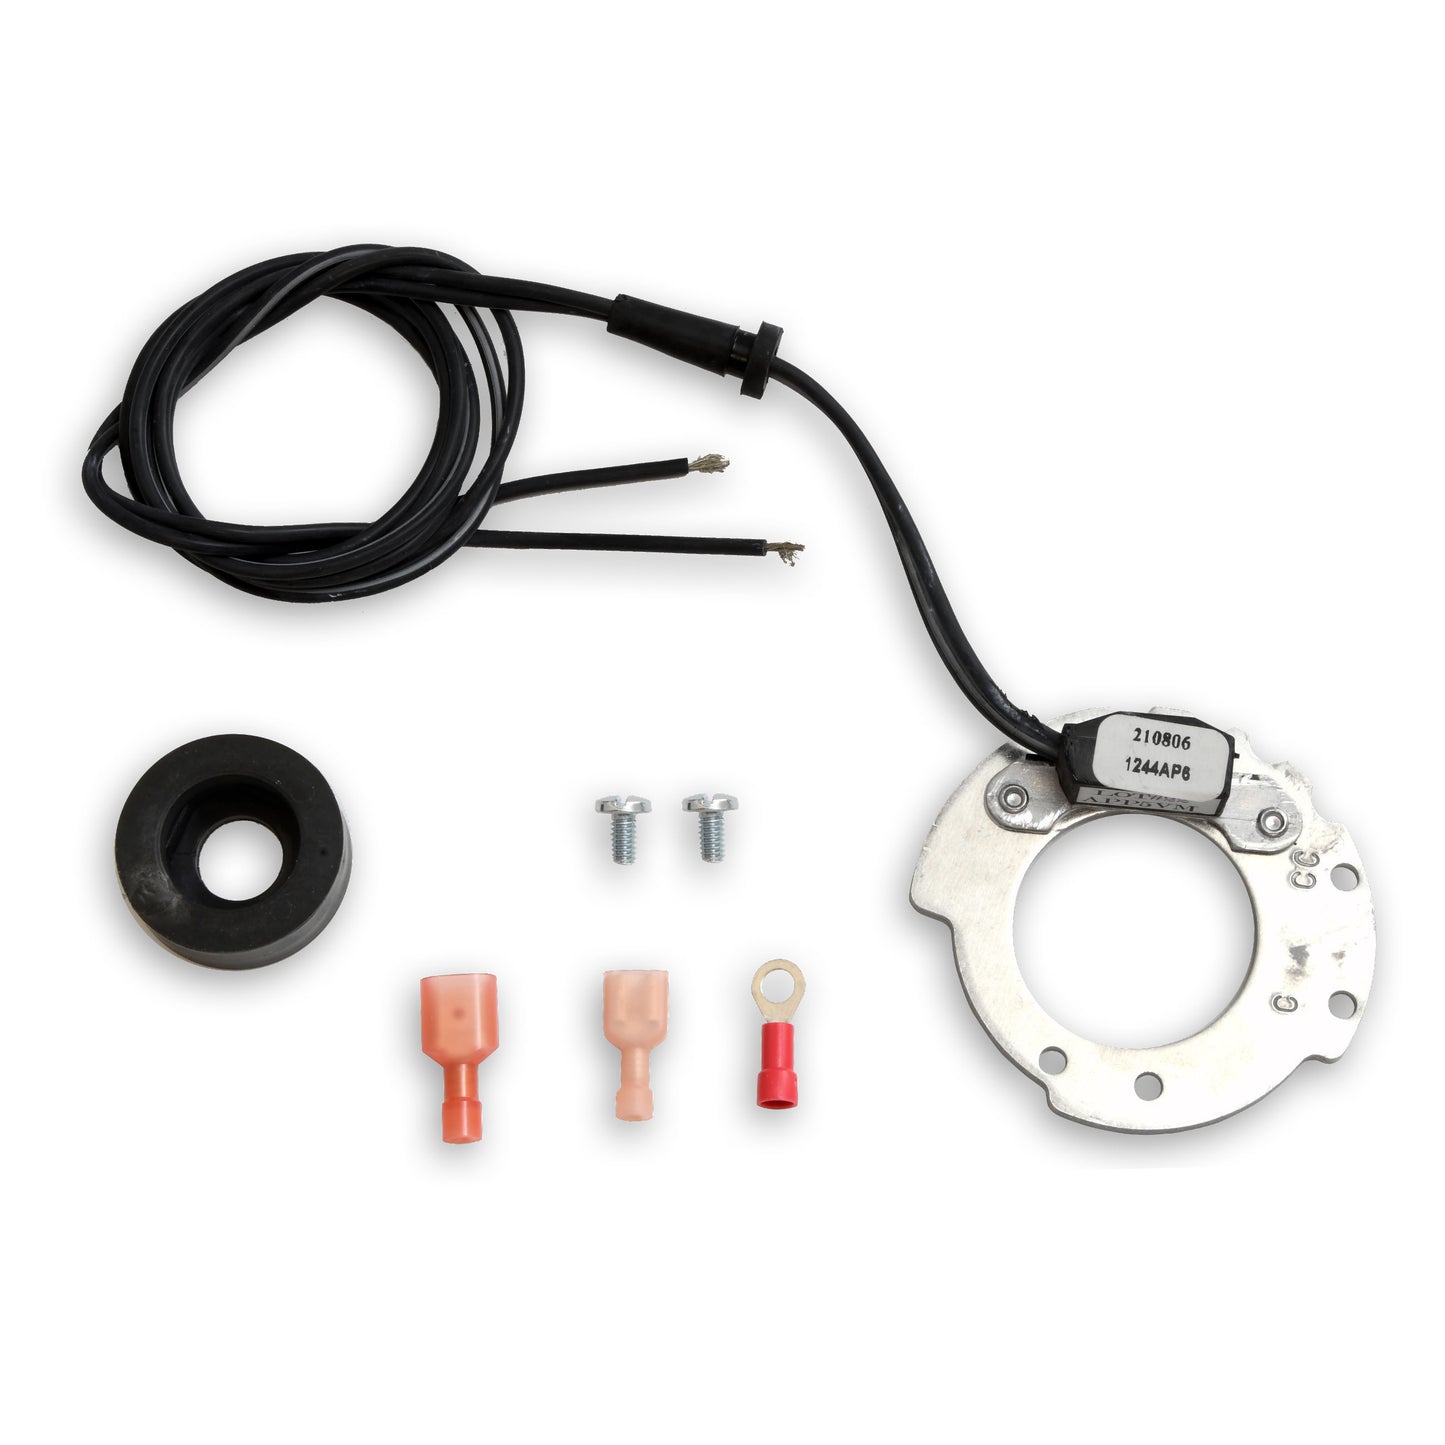 PerTronix Ignitor Electronic Ignition Conversion Kit-1244AP6
